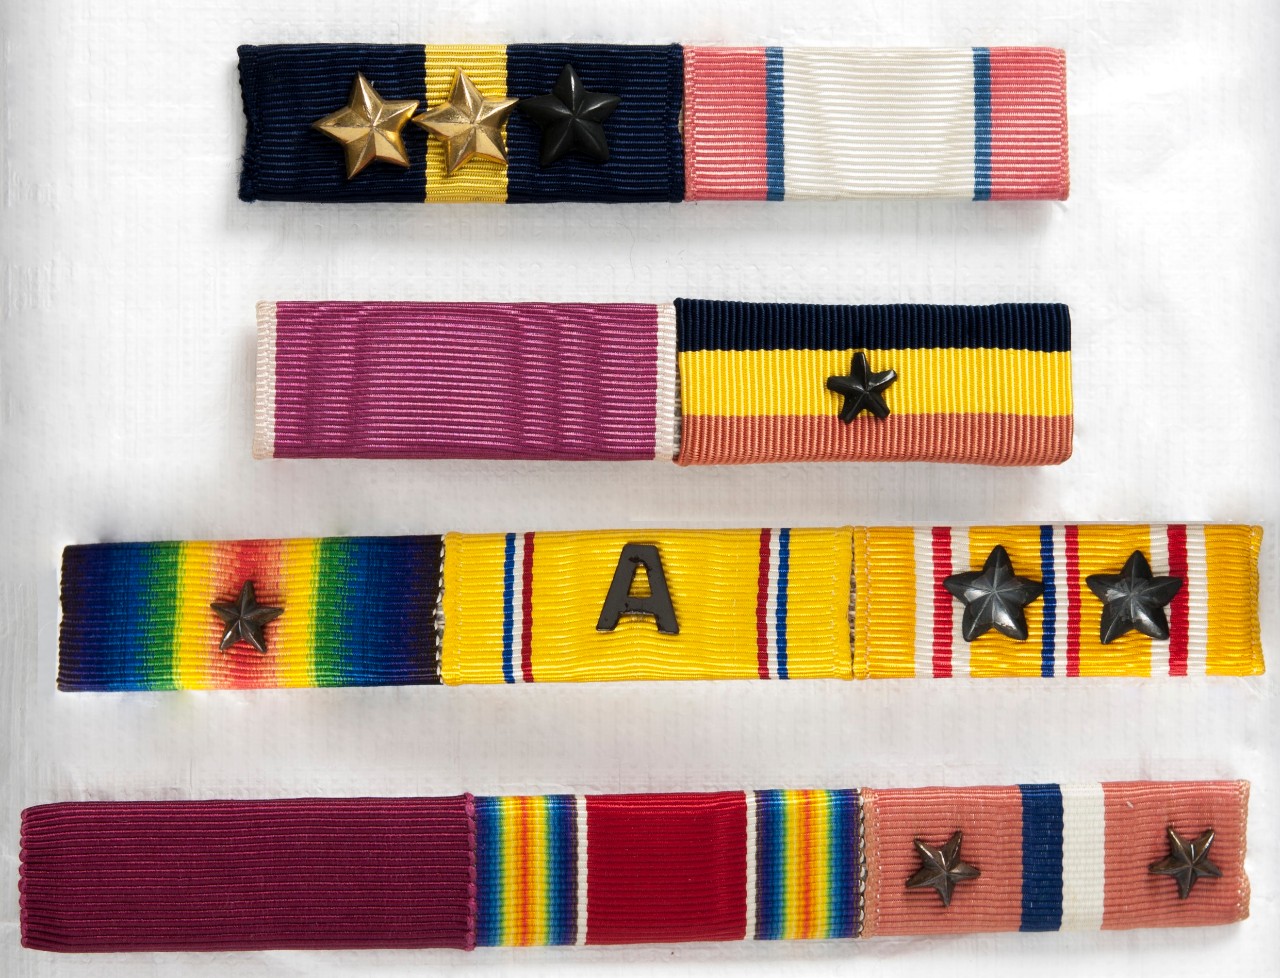 NH 115616 Ribbons of Decorations and medals for Naval personnel, as of 1942.